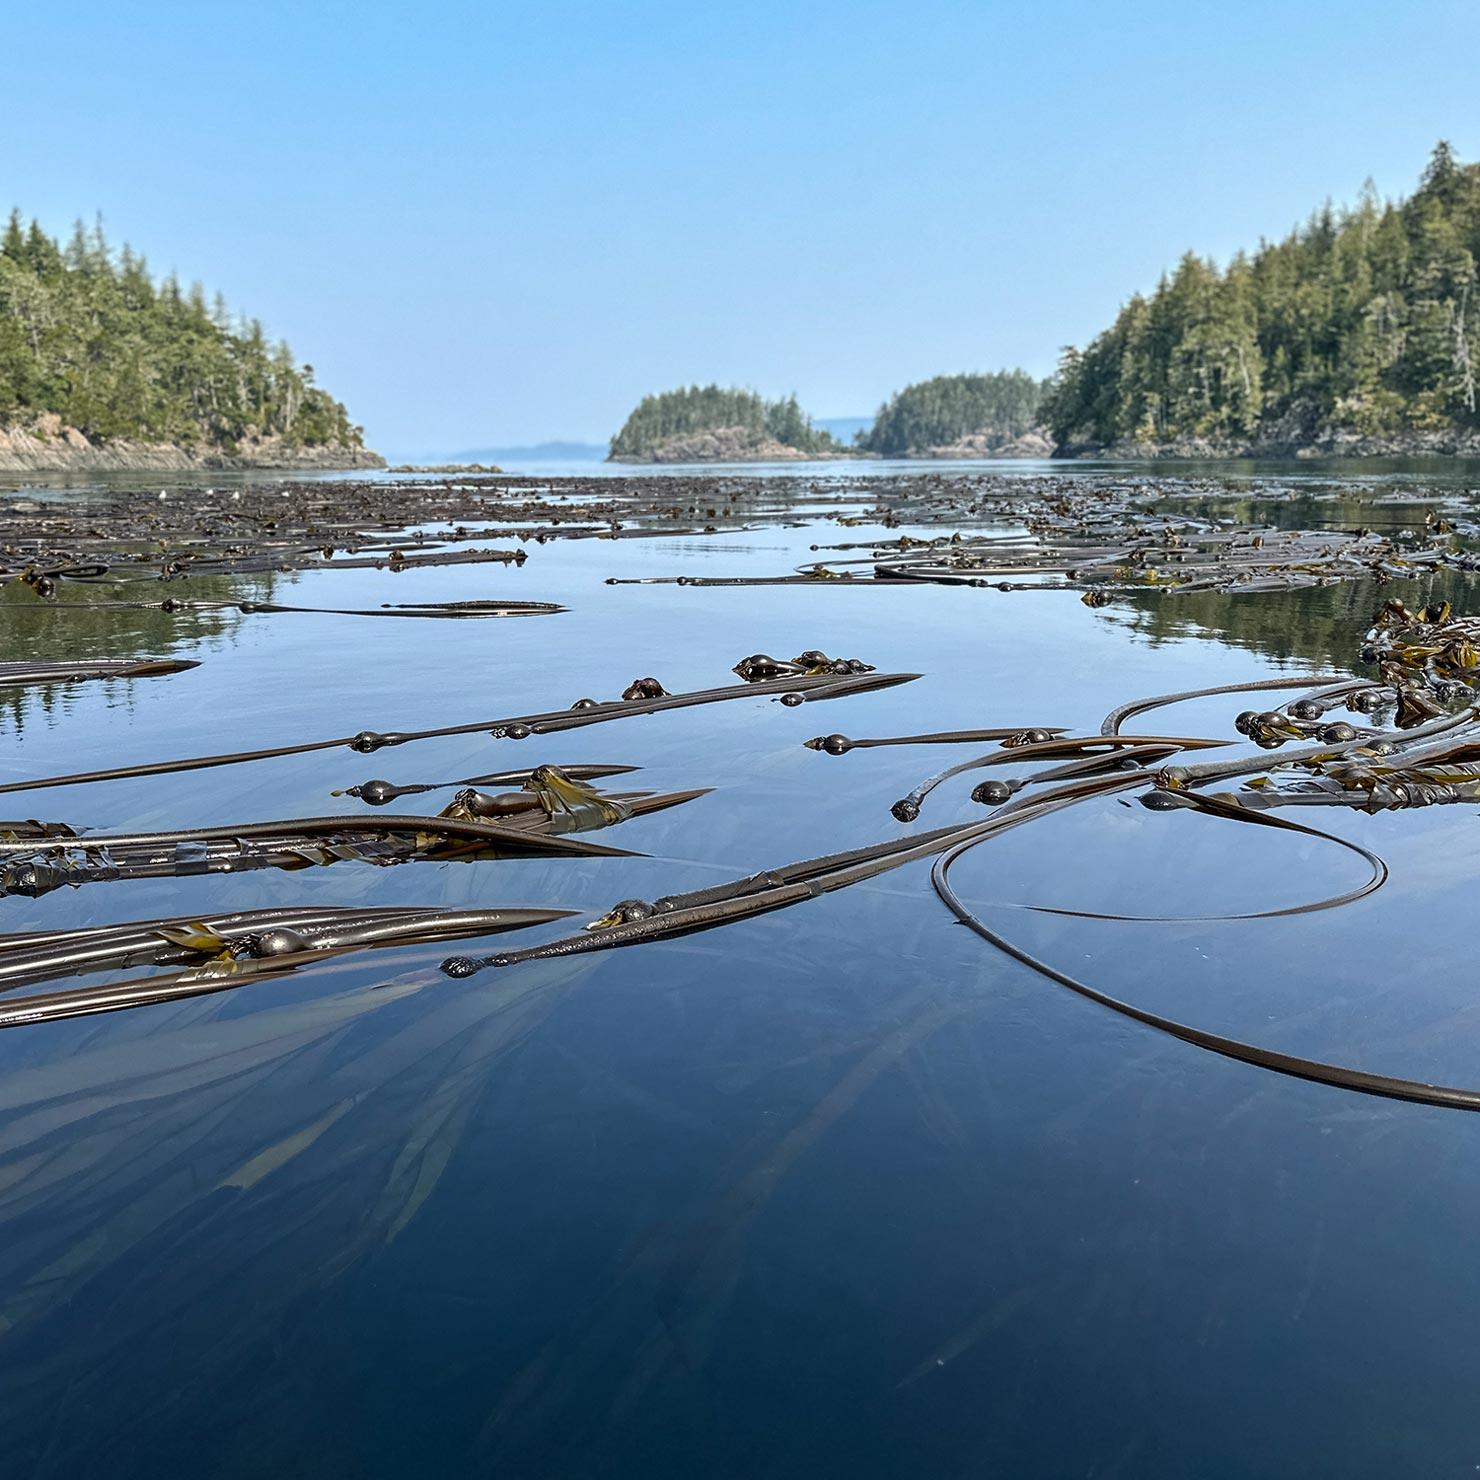 Kelp on surface of still water in British Columbia